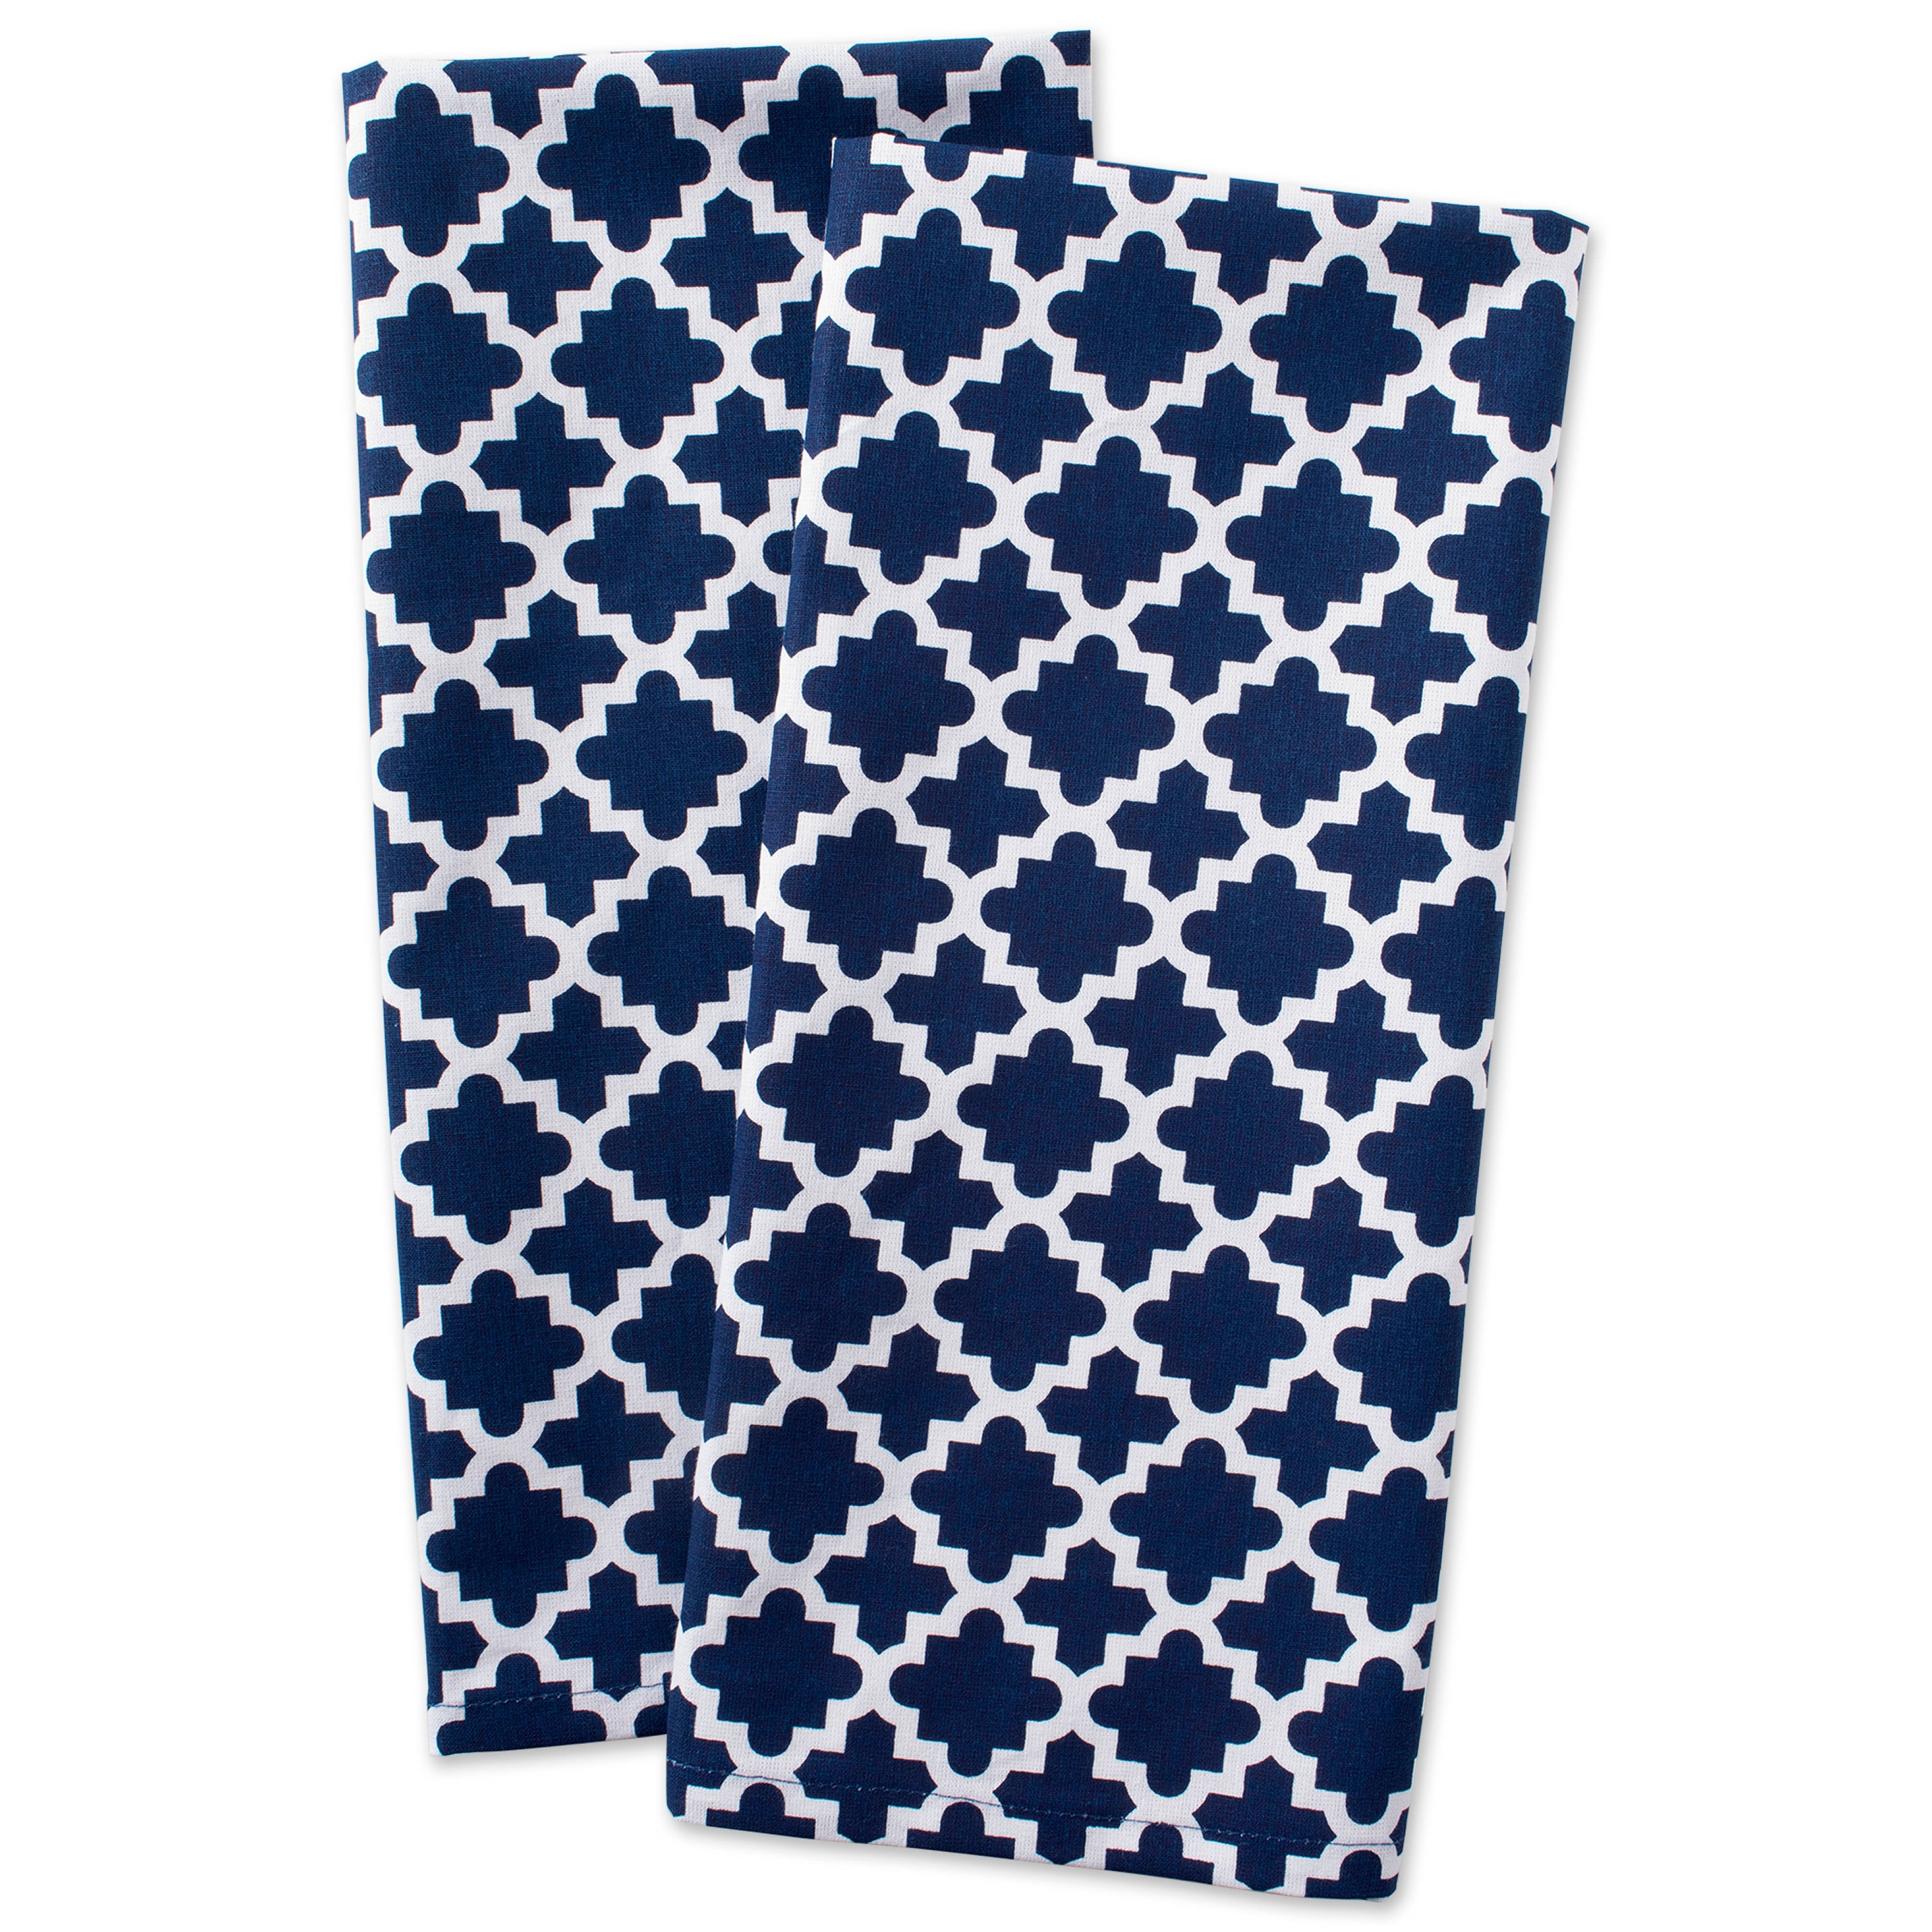 https://ak1.ostkcdn.com/images/products/is/images/direct/736e6f05e23d96c7f340090275c9d9f16727147a/Design-Imports-Lattice-Dishtowel-Set-of-2-%2828-inches-long-x-18-inches-wide%29.jpg